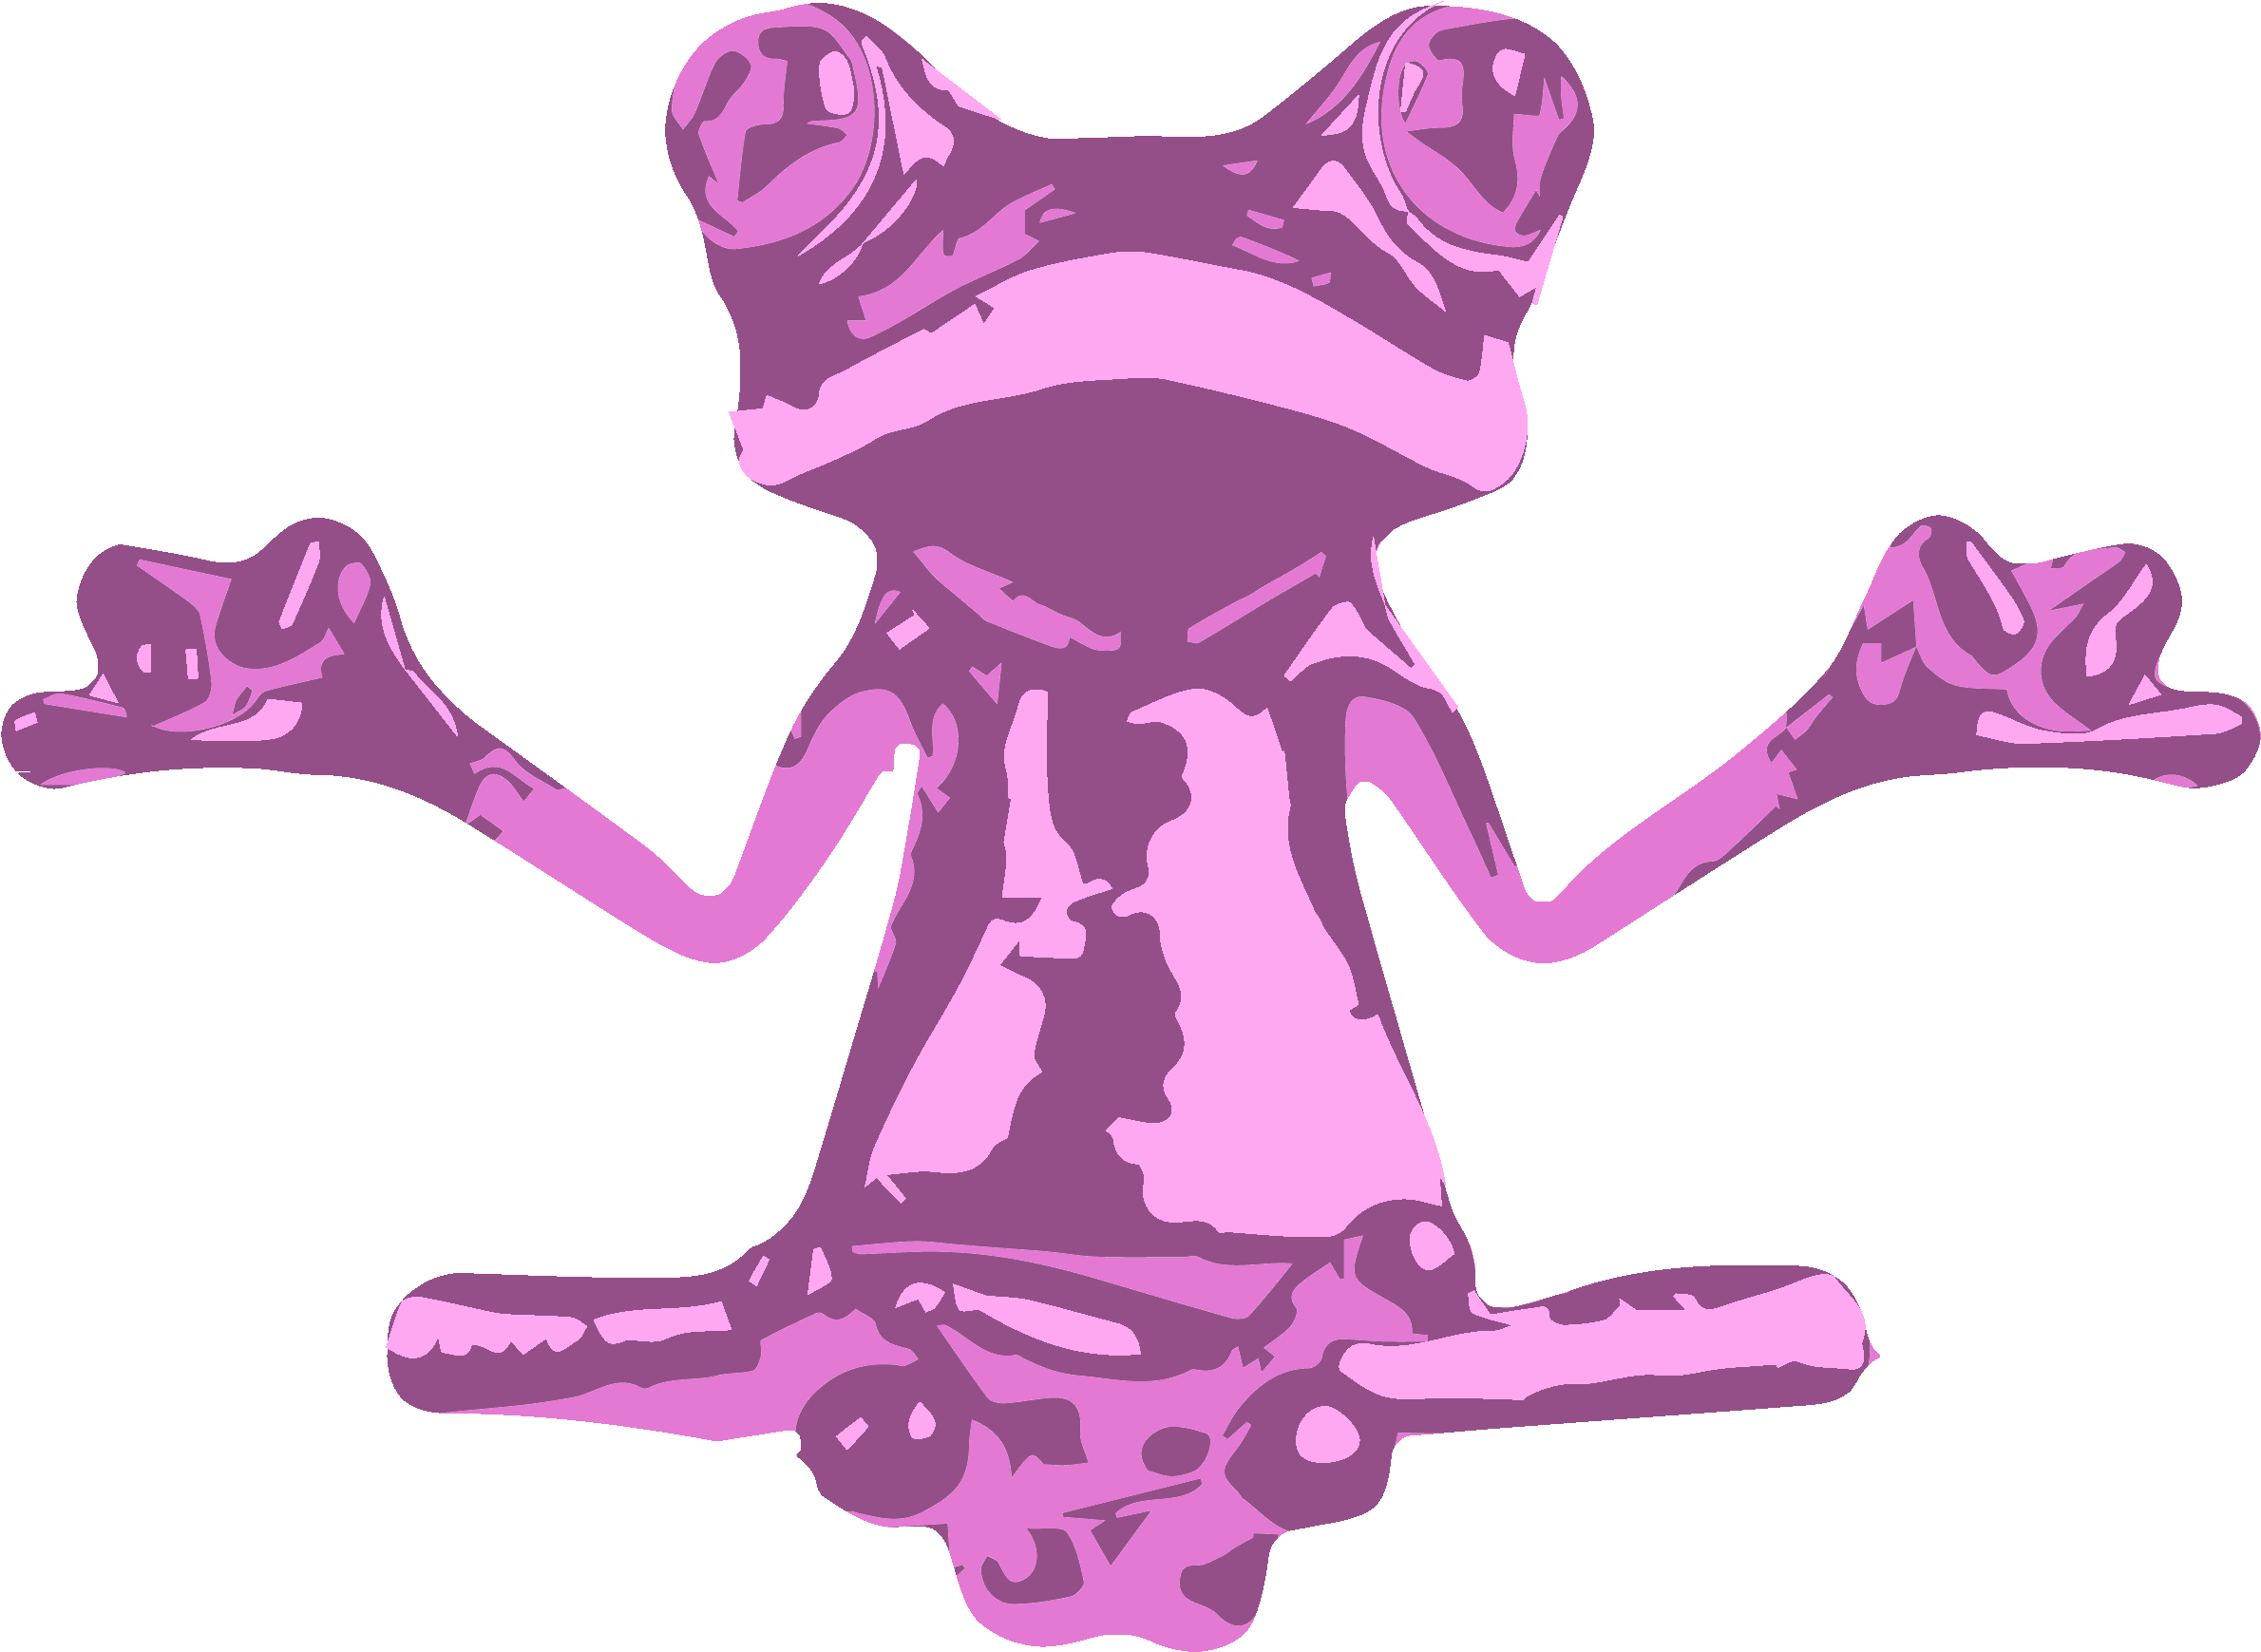 Rave Bunny - Frog In Yoga Pose (2479x1936)